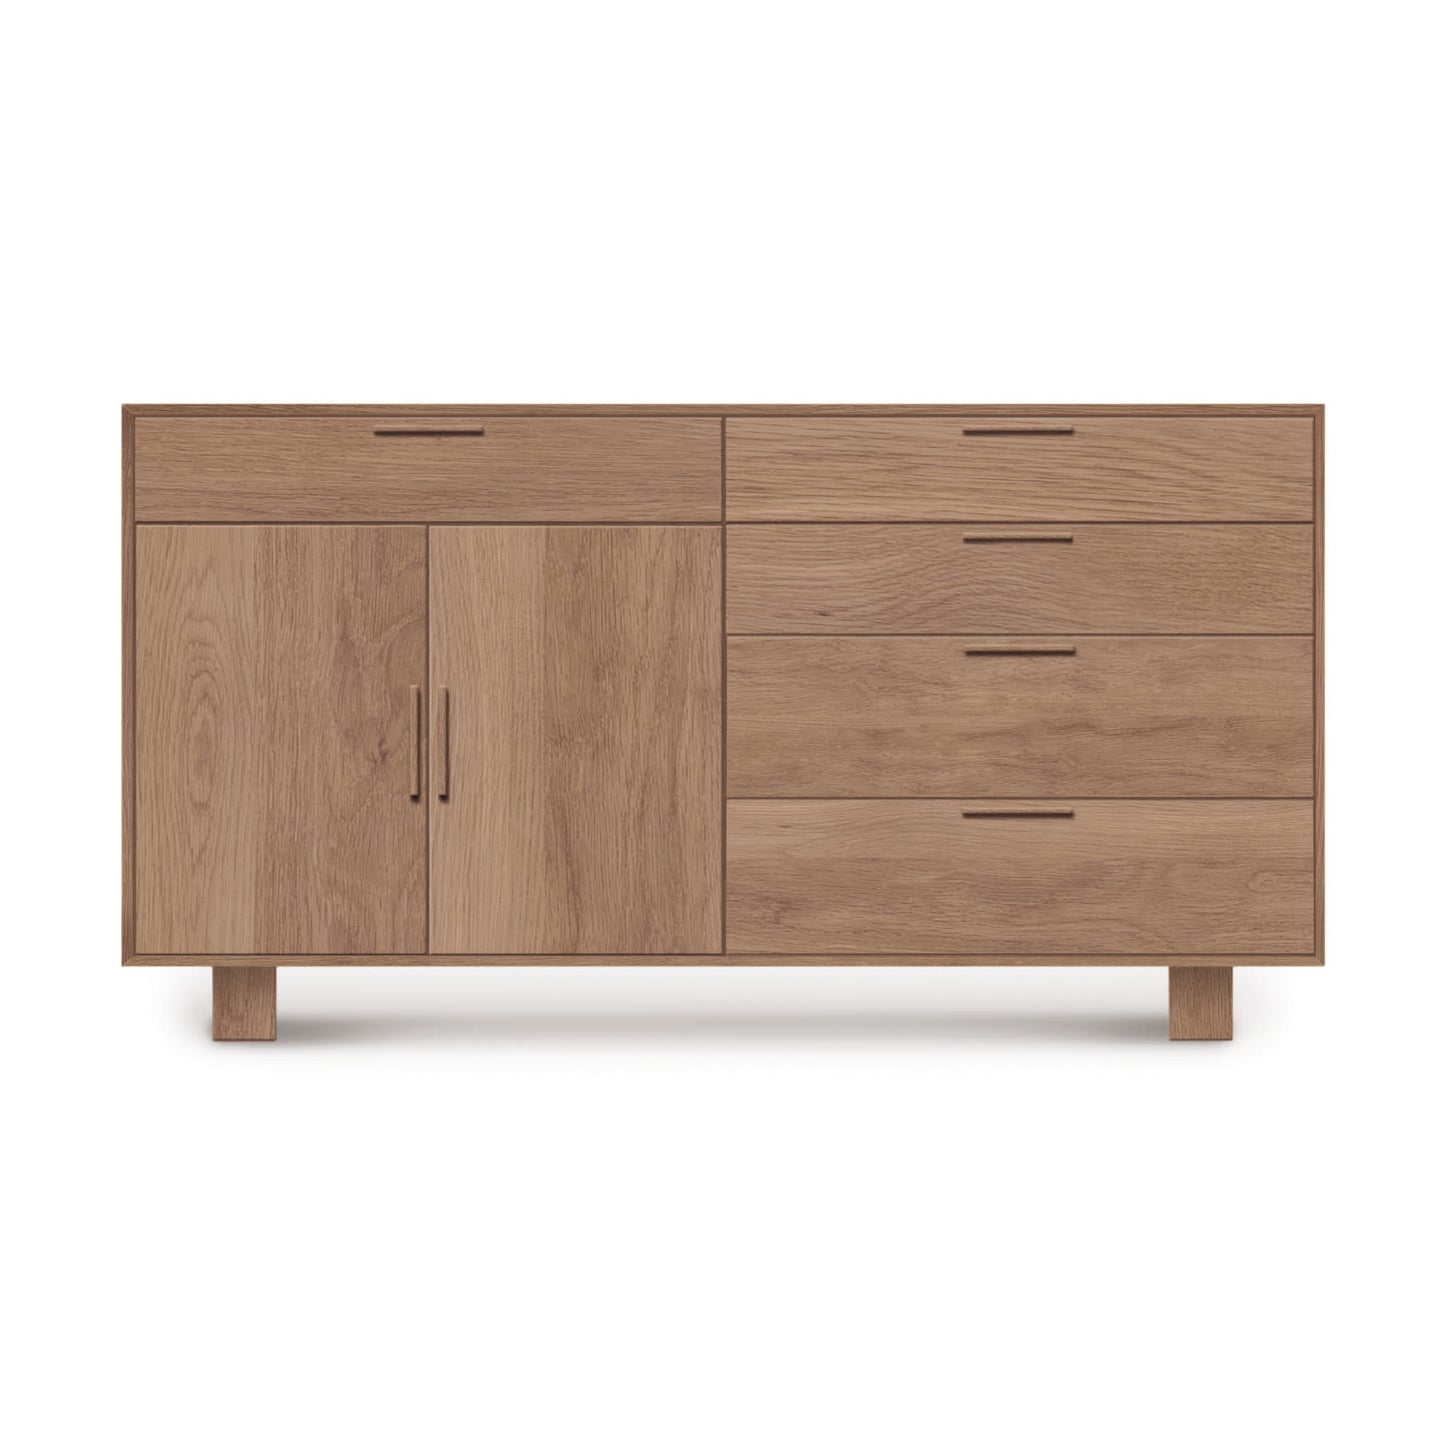 A modern solid hardwood Iso Oak 2 Door, 5 Drawer Buffet from Copeland Furniture, isolated against a white background.